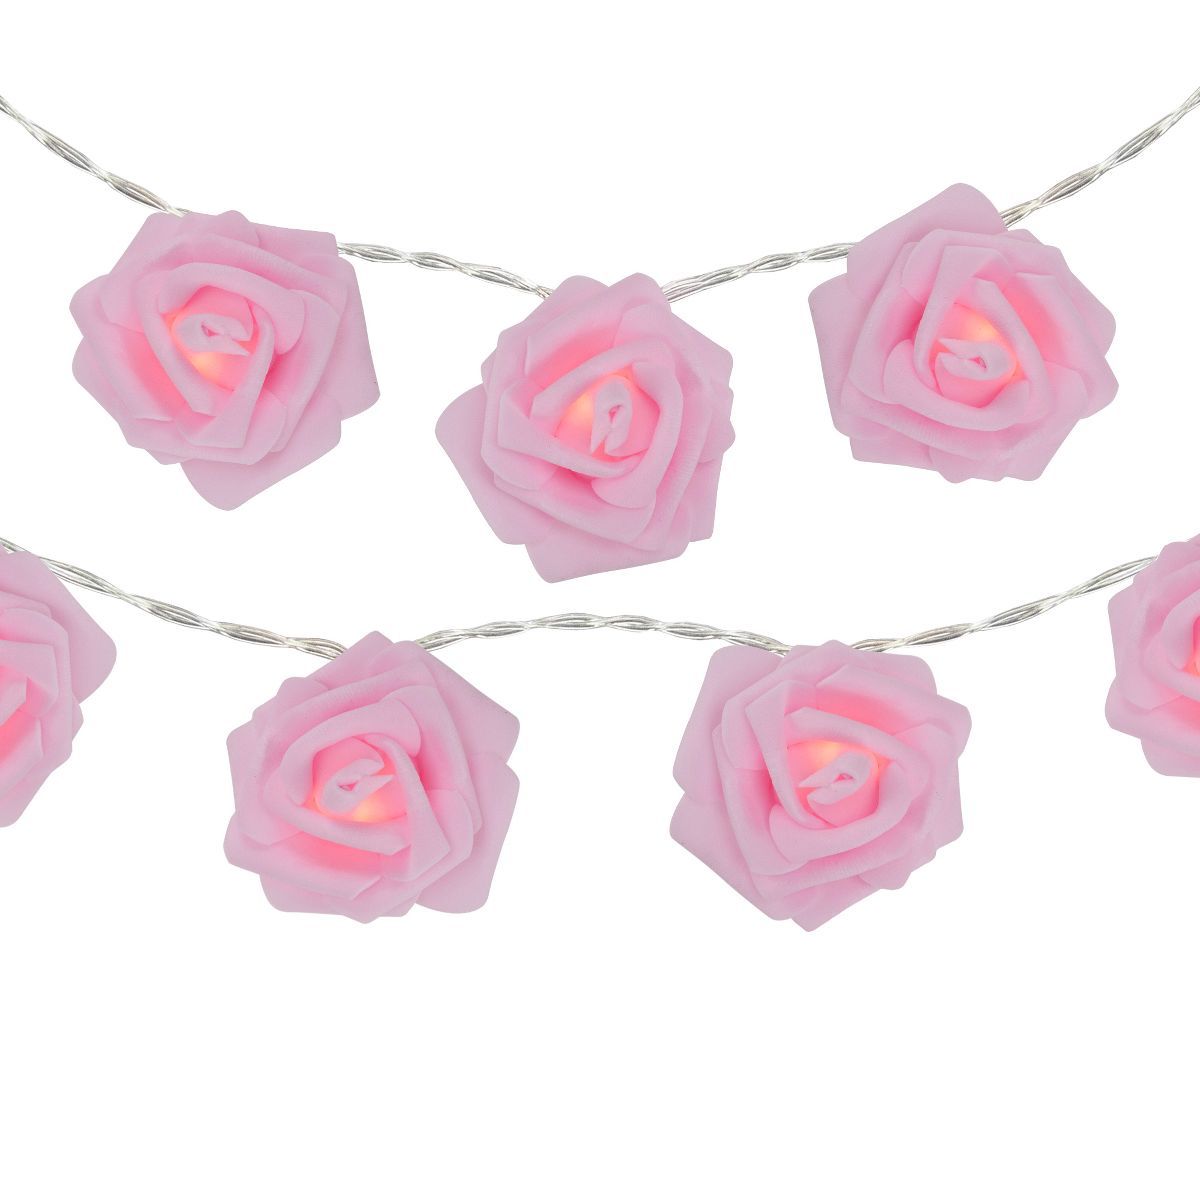 Northlight 10-Count Pink Rose Flower LED String Lights, 4.5ft, Clear Wire | Target